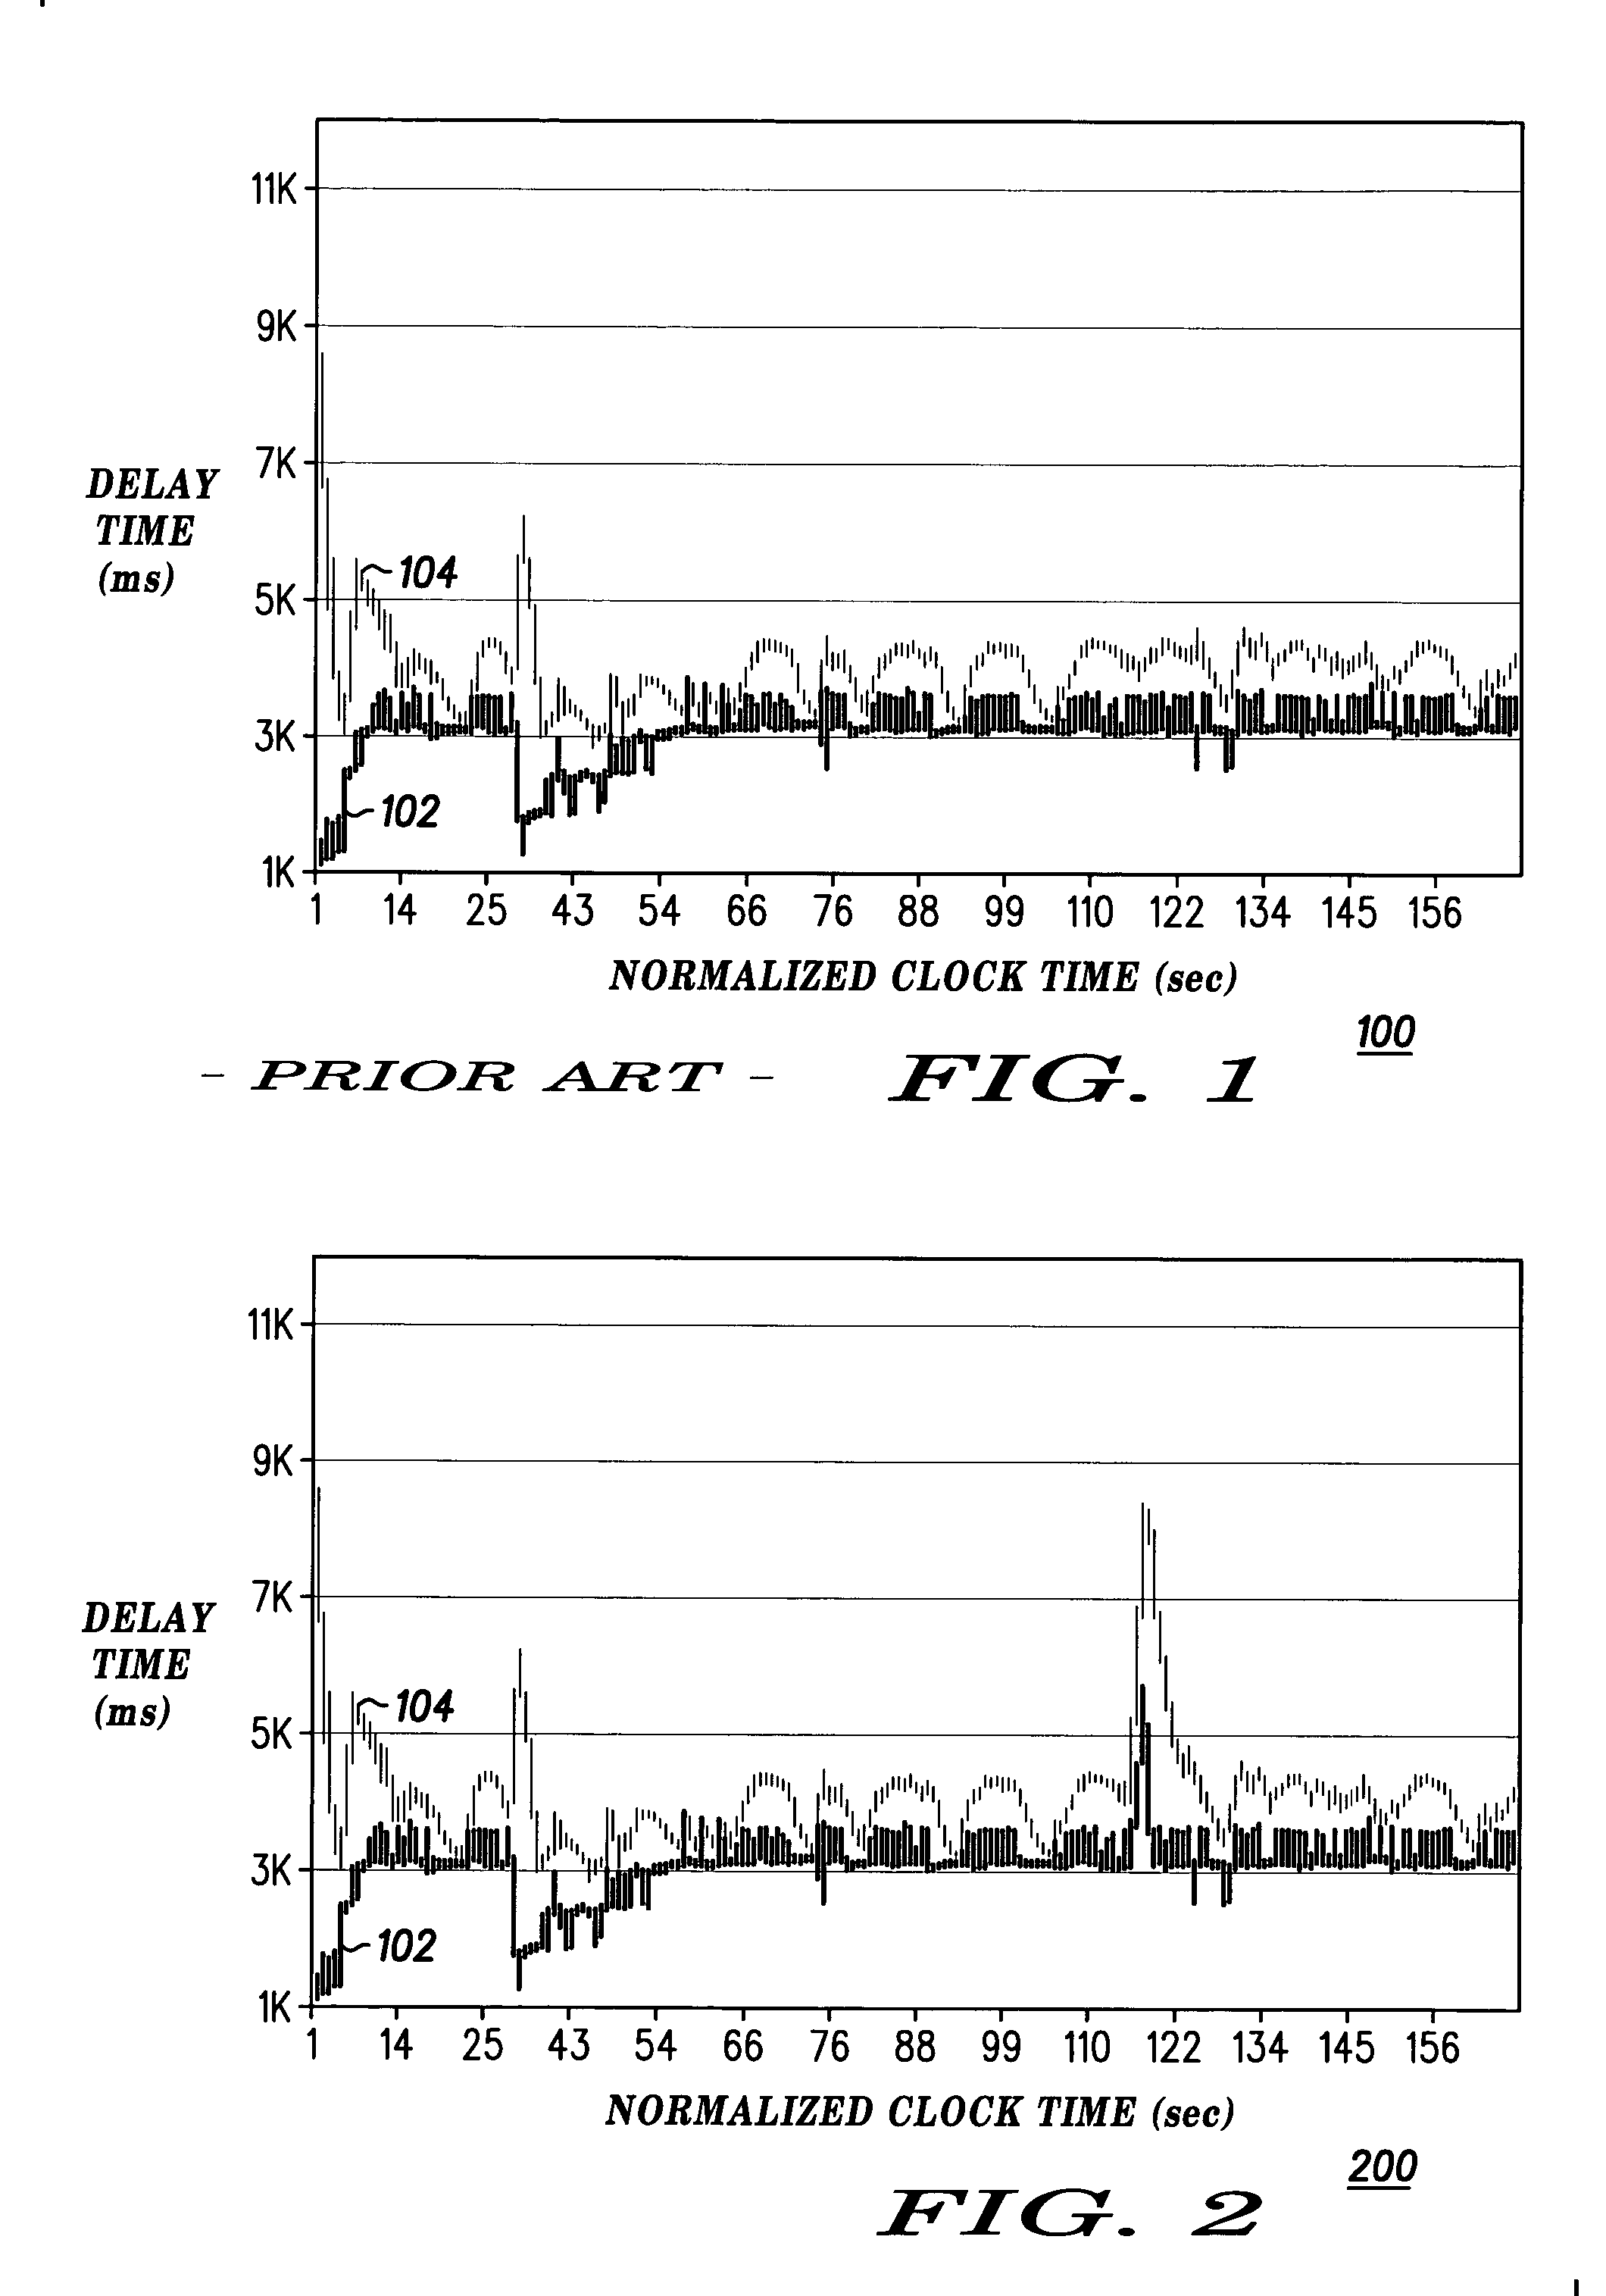 Method and apparatus for preventing a spurious retransmission after a planned interruption of communications